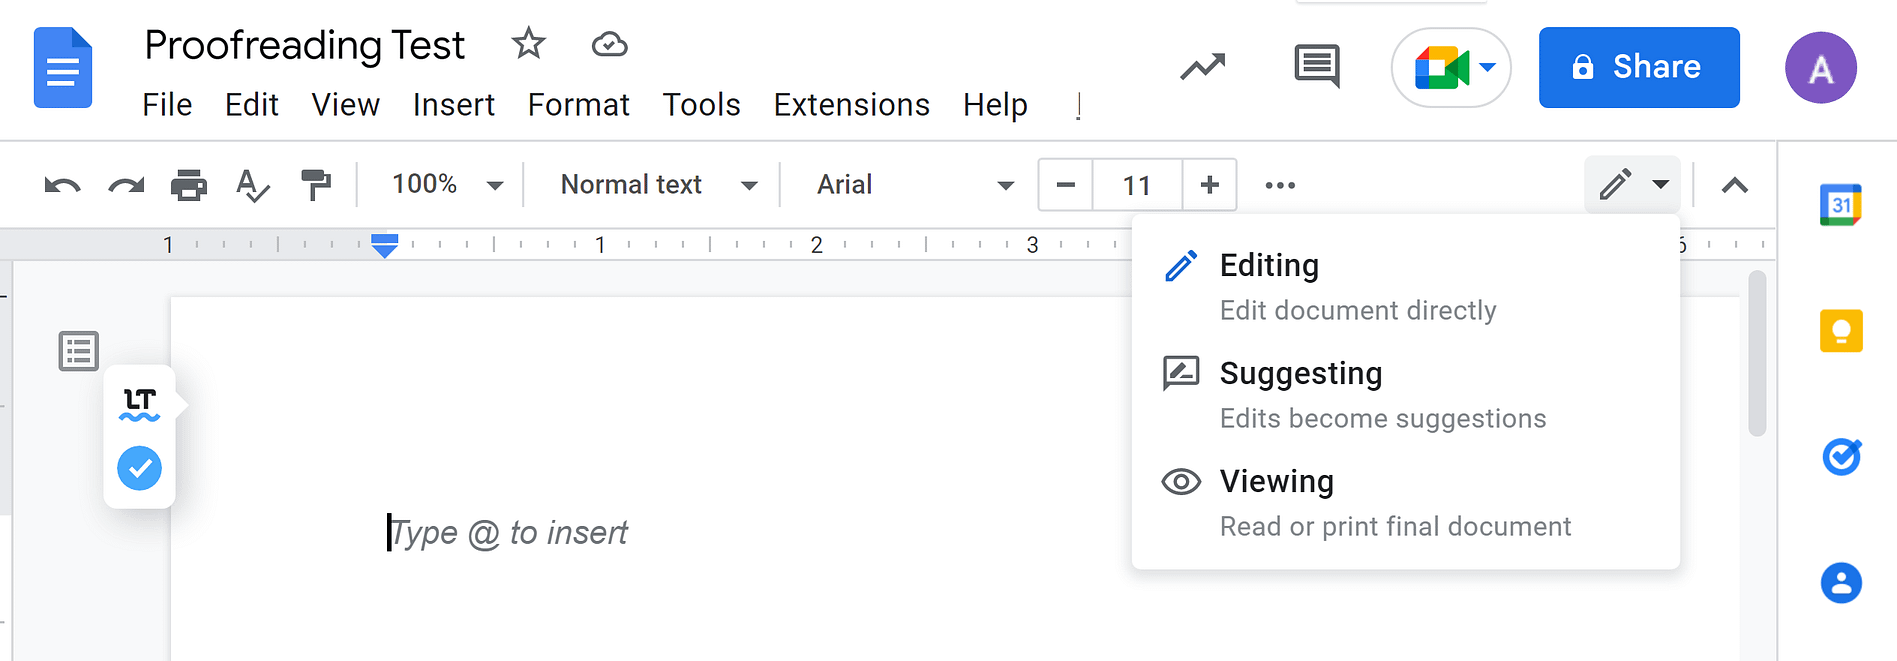 Using Google Docs to set up a proofreading test